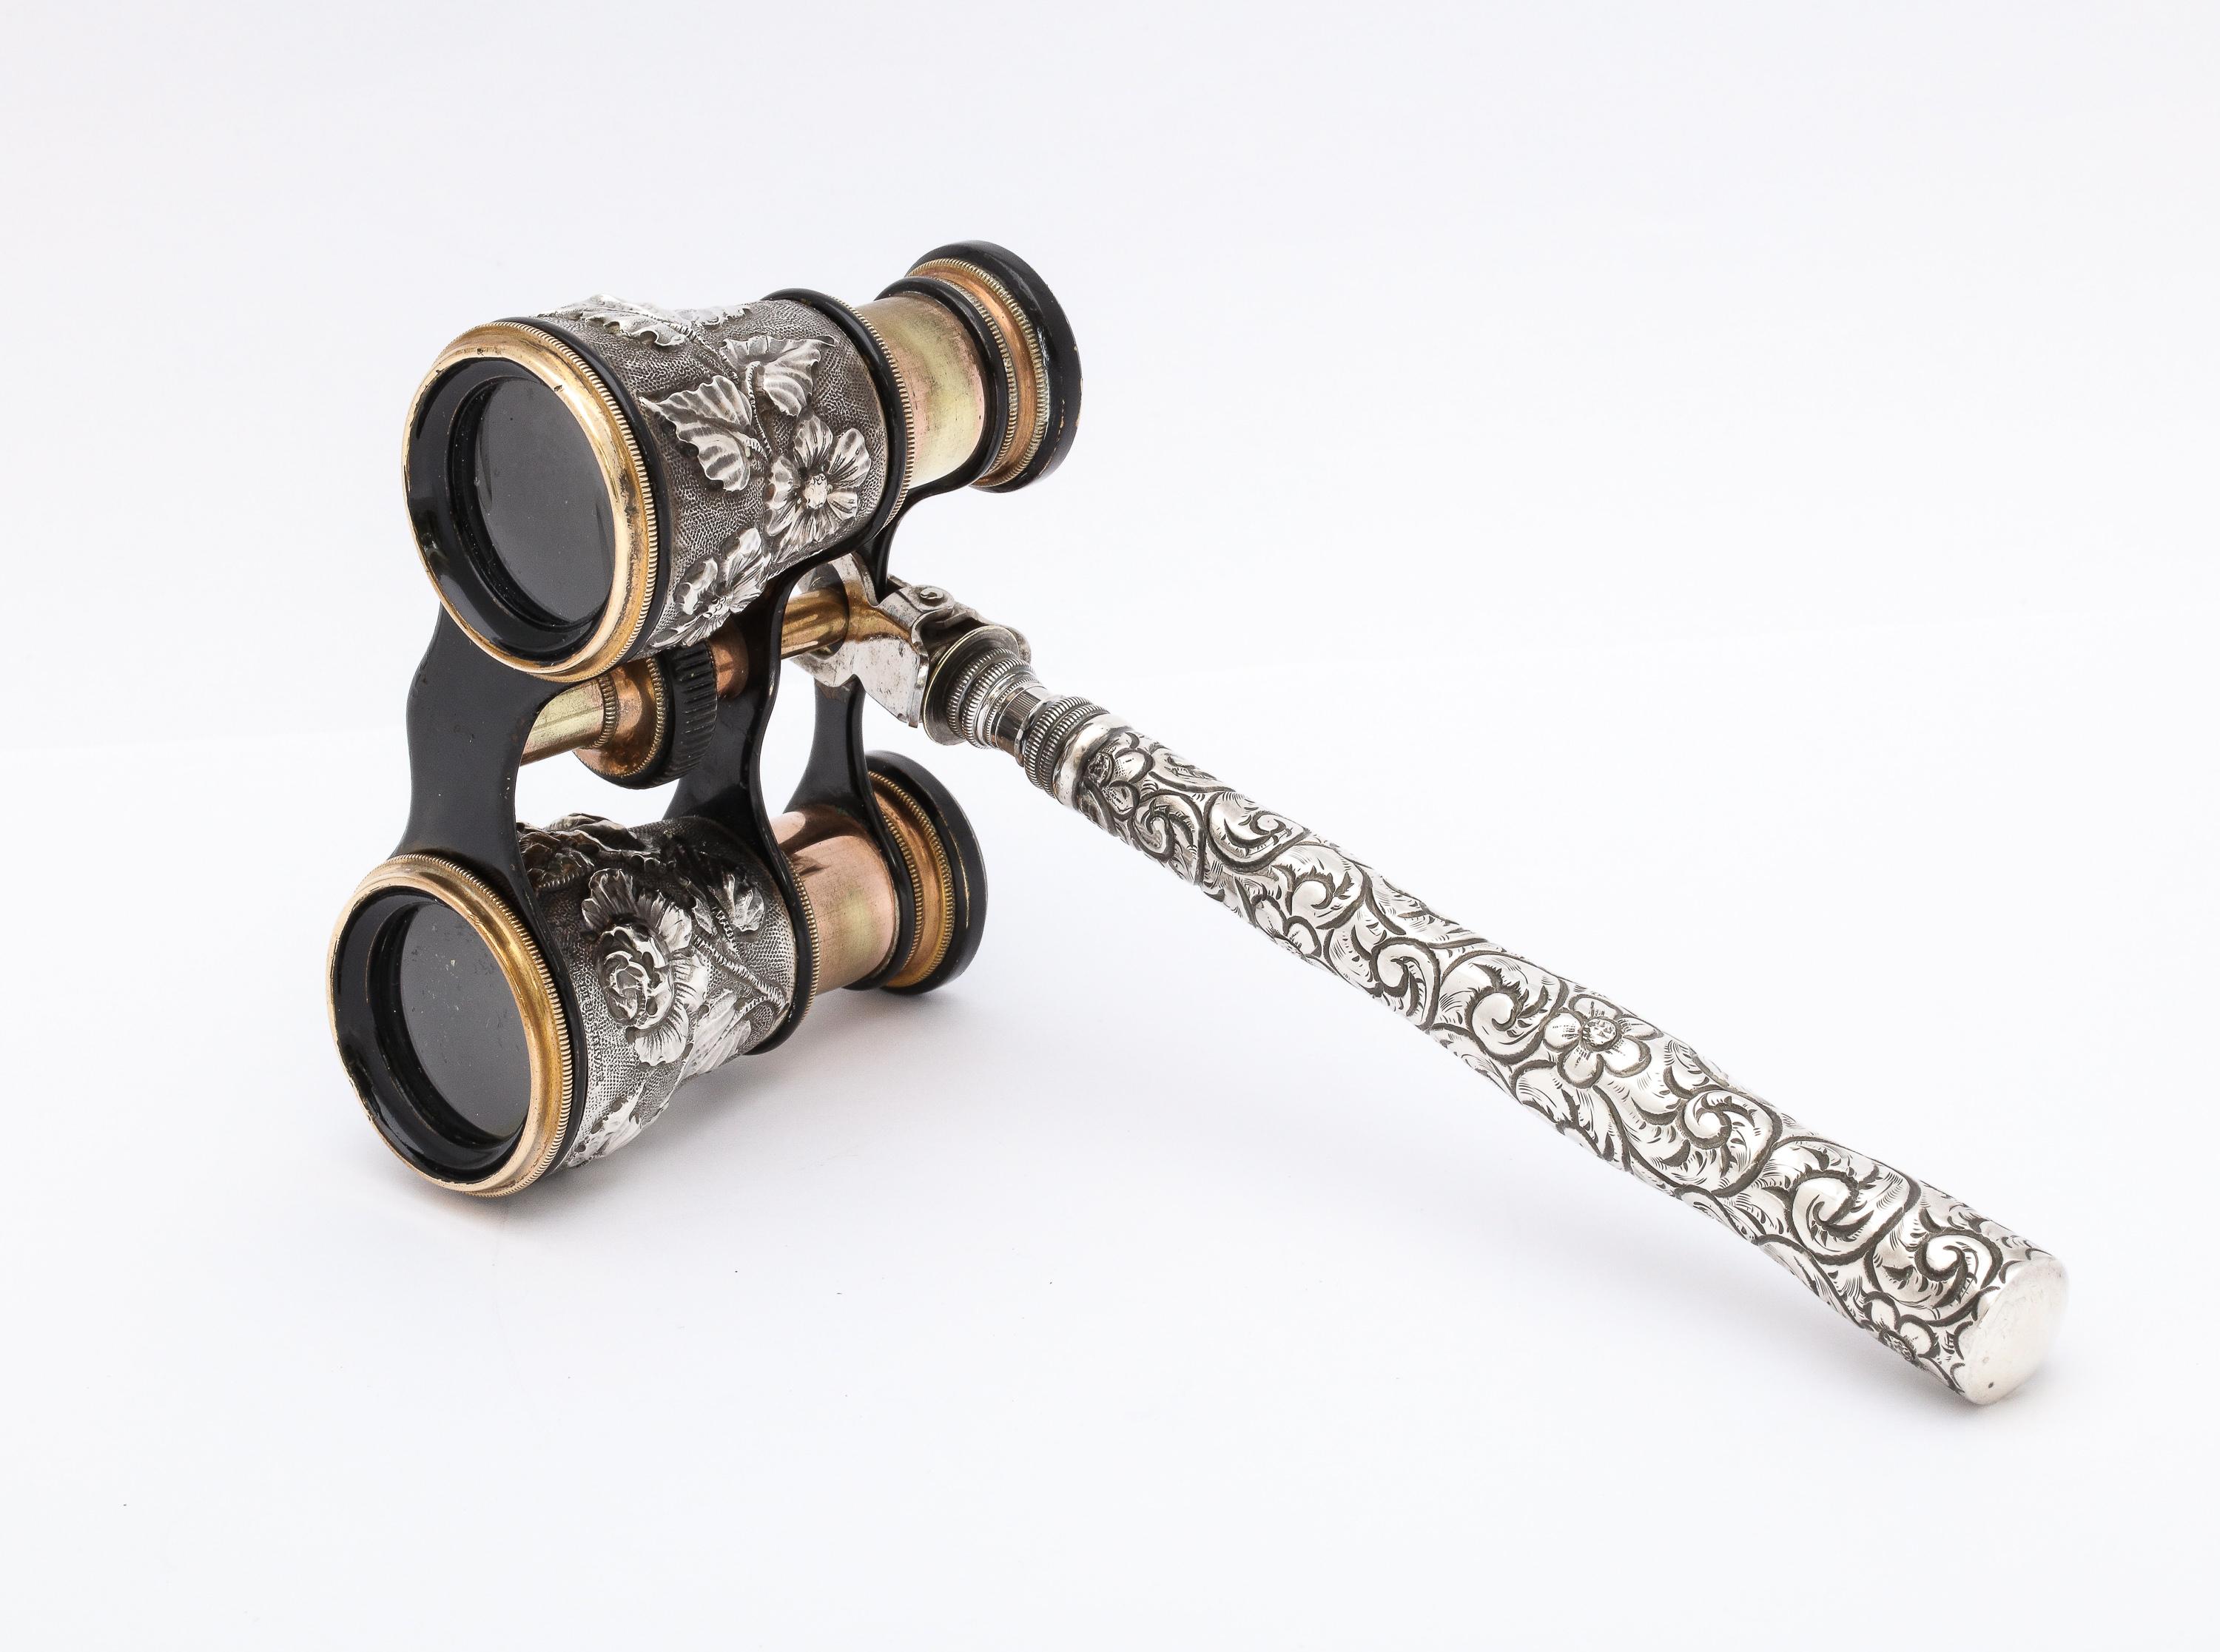 Rare pair of sterling silver opera glasses/binoculars, England, Ca. 1890's. The handle, which is removable, measures 7 inches from tip to tip. Adjustable opera glasses measure 4 inches wide x 3 1/4 inches deep when lenses are fully extended x 2 1/4